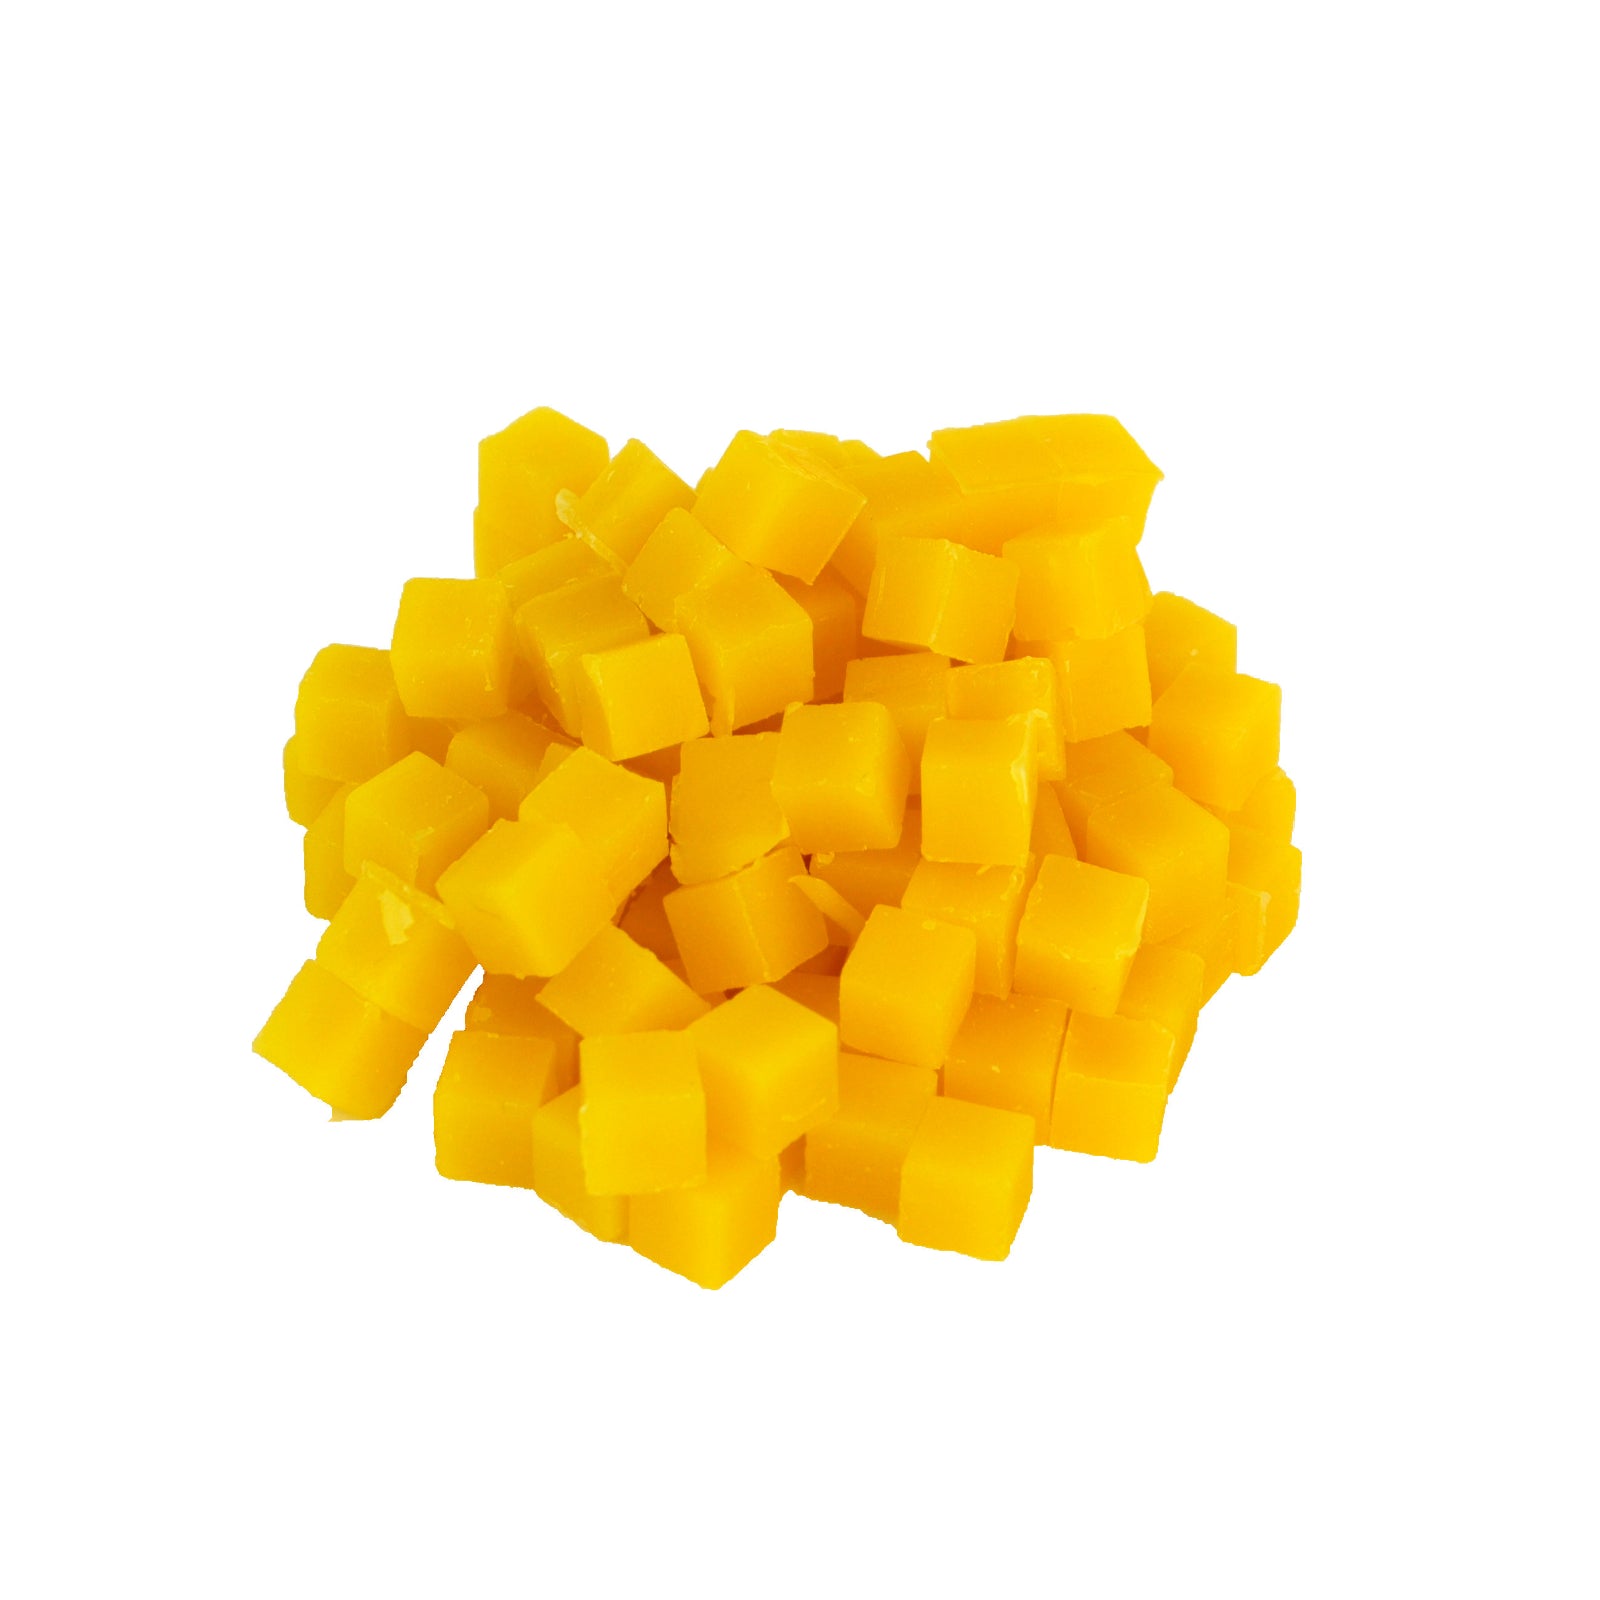 White Beeswax Pastilles for Candle - 500g/ 1kg